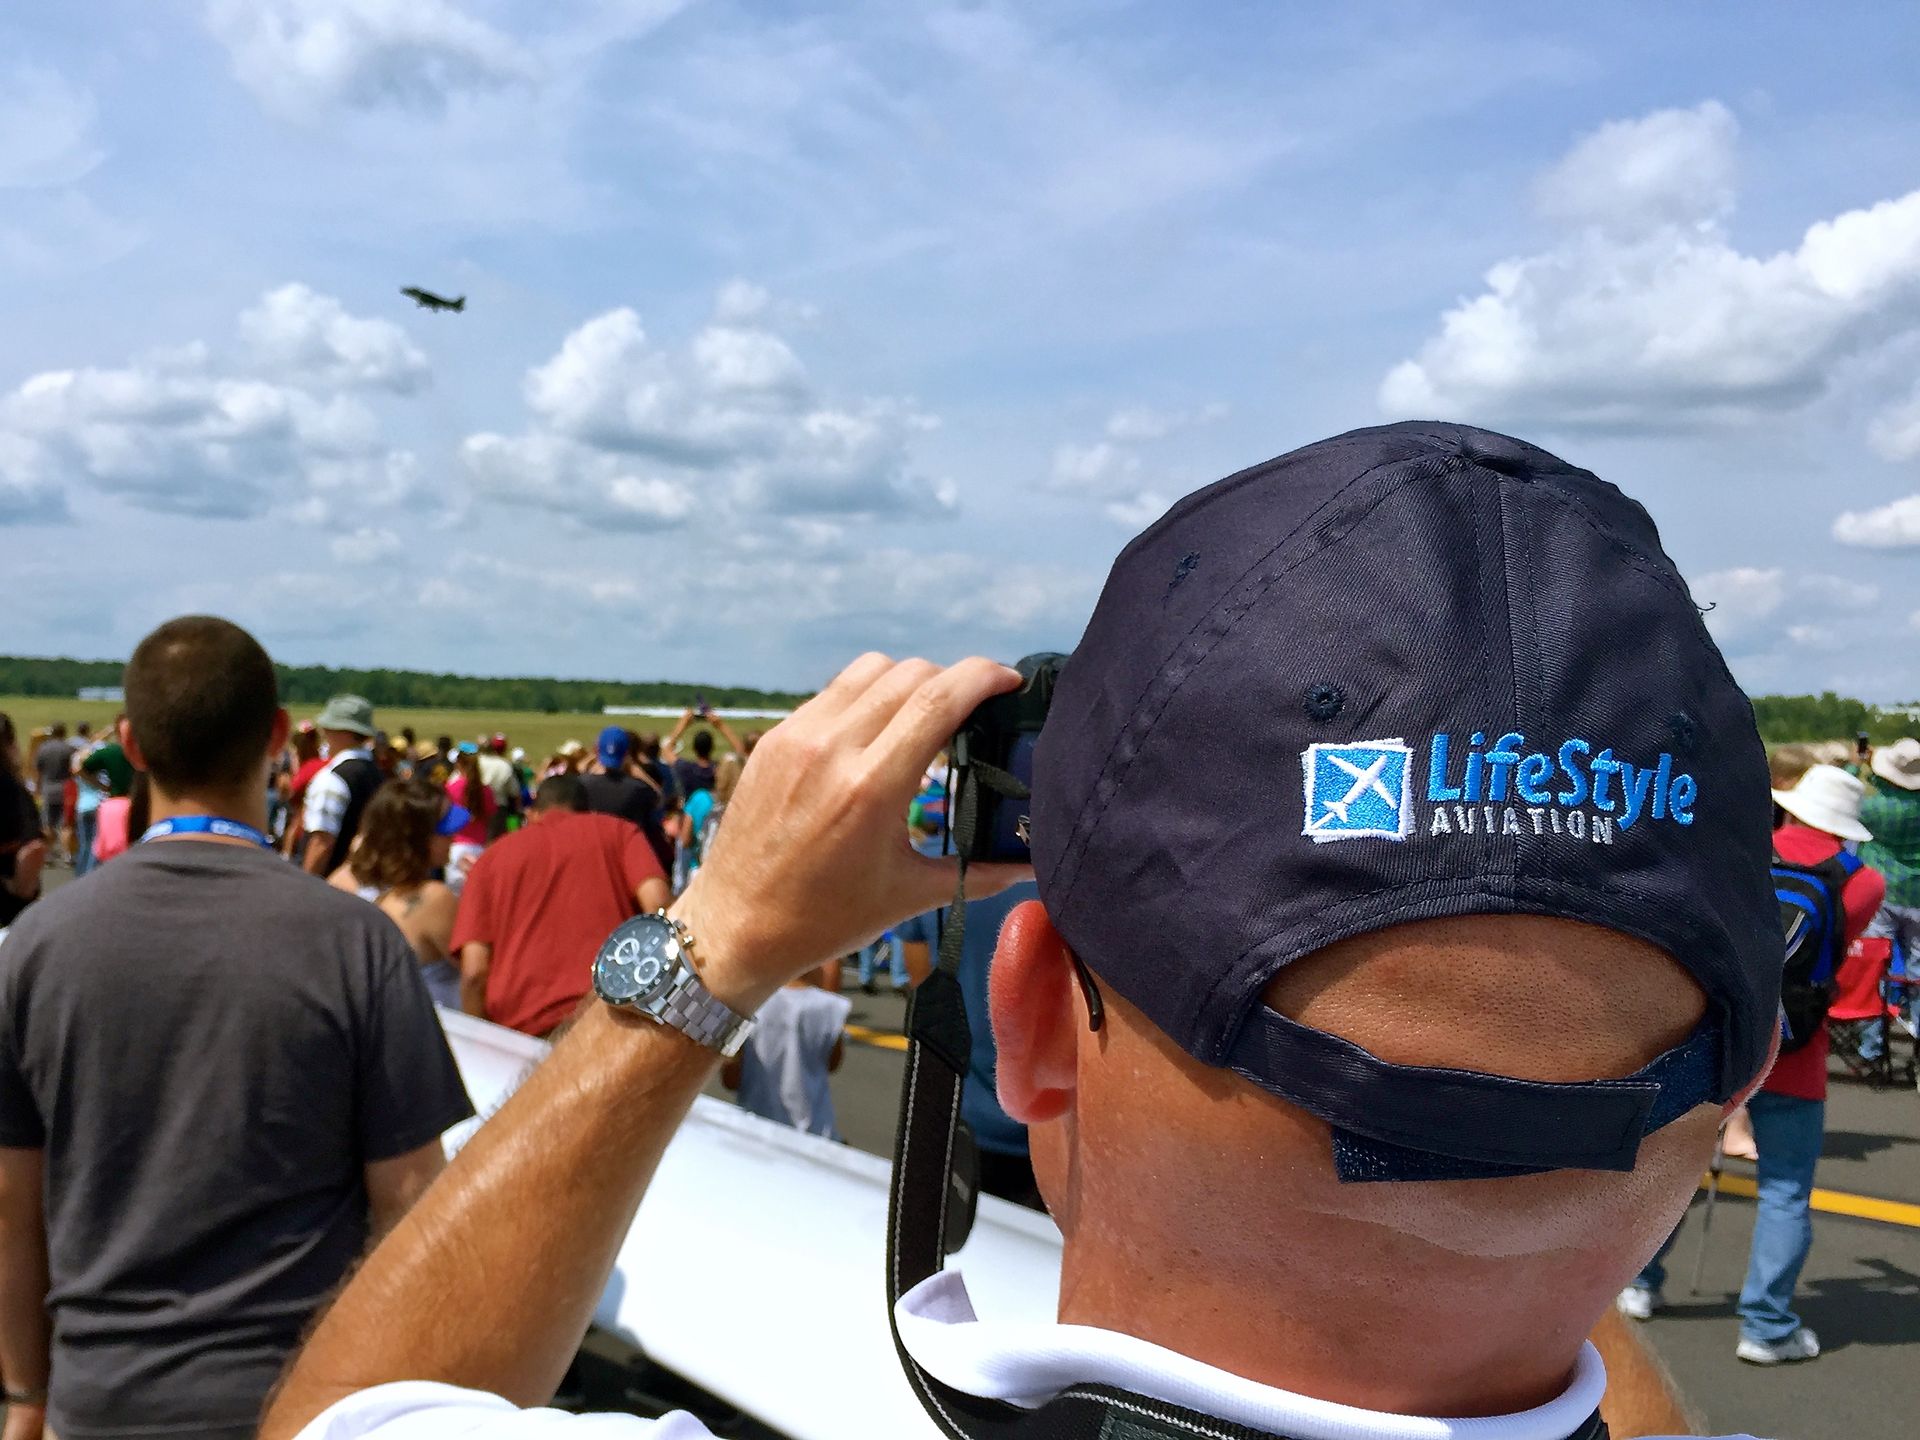 Watching airplane take off at air show